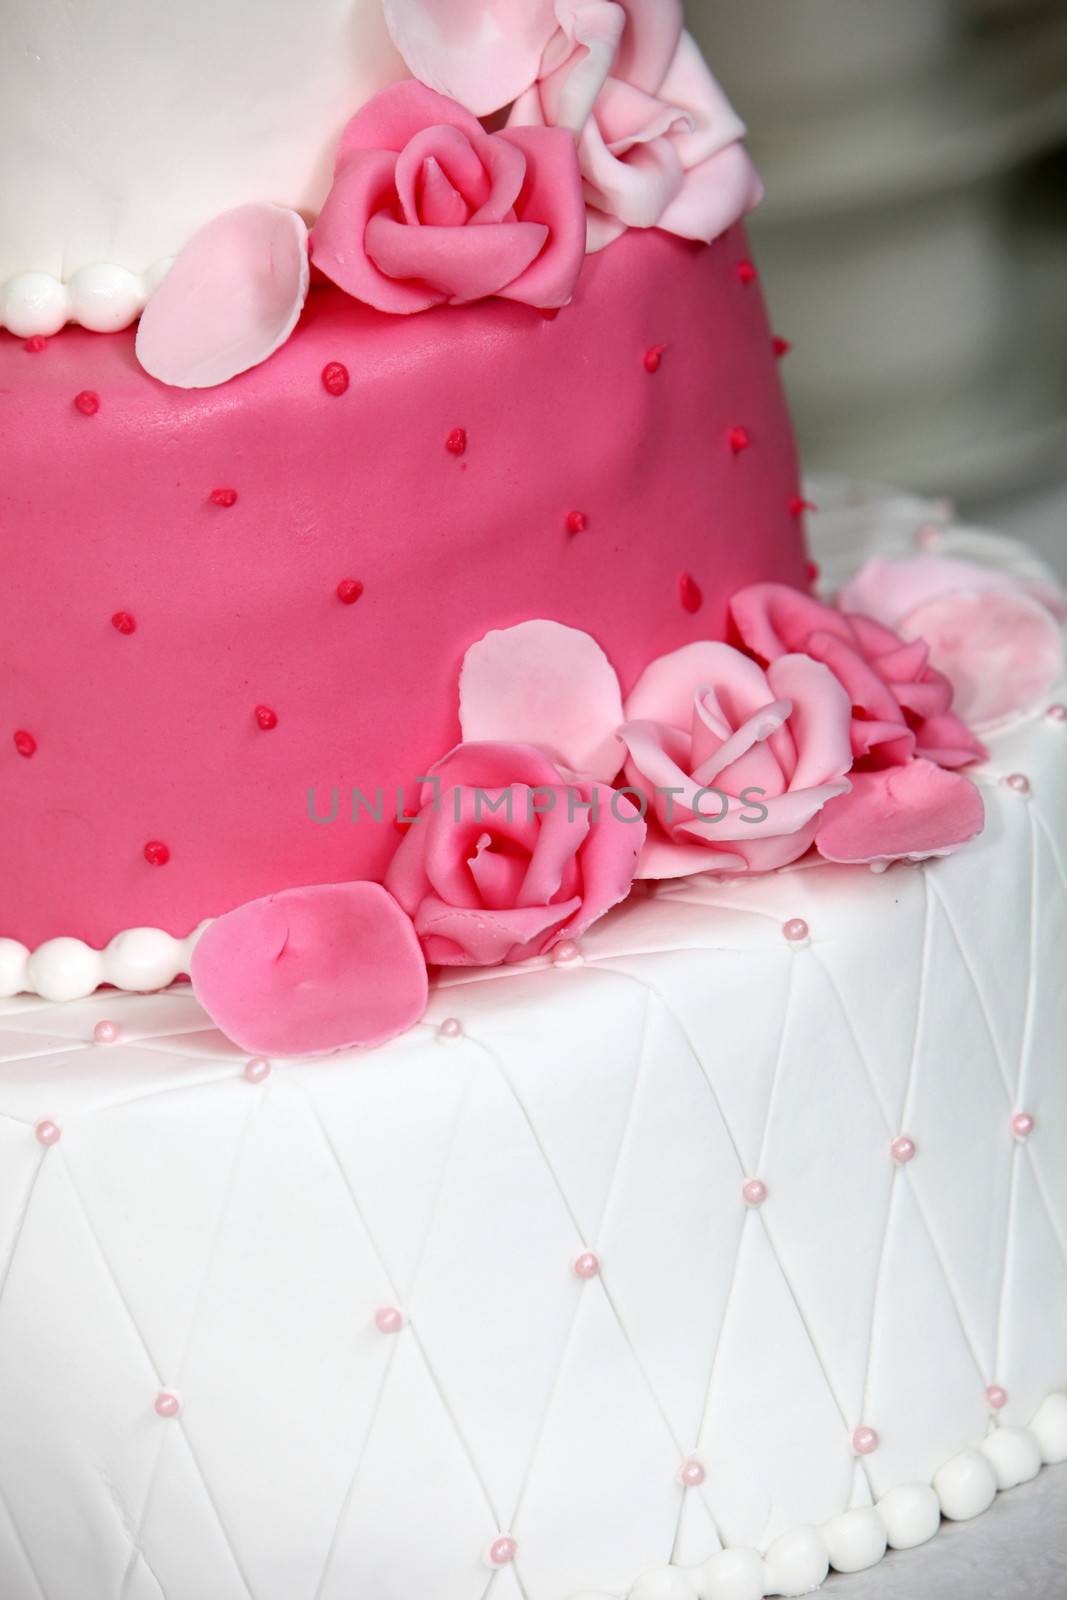 Tiered wedding cake with pink roses by Farina6000